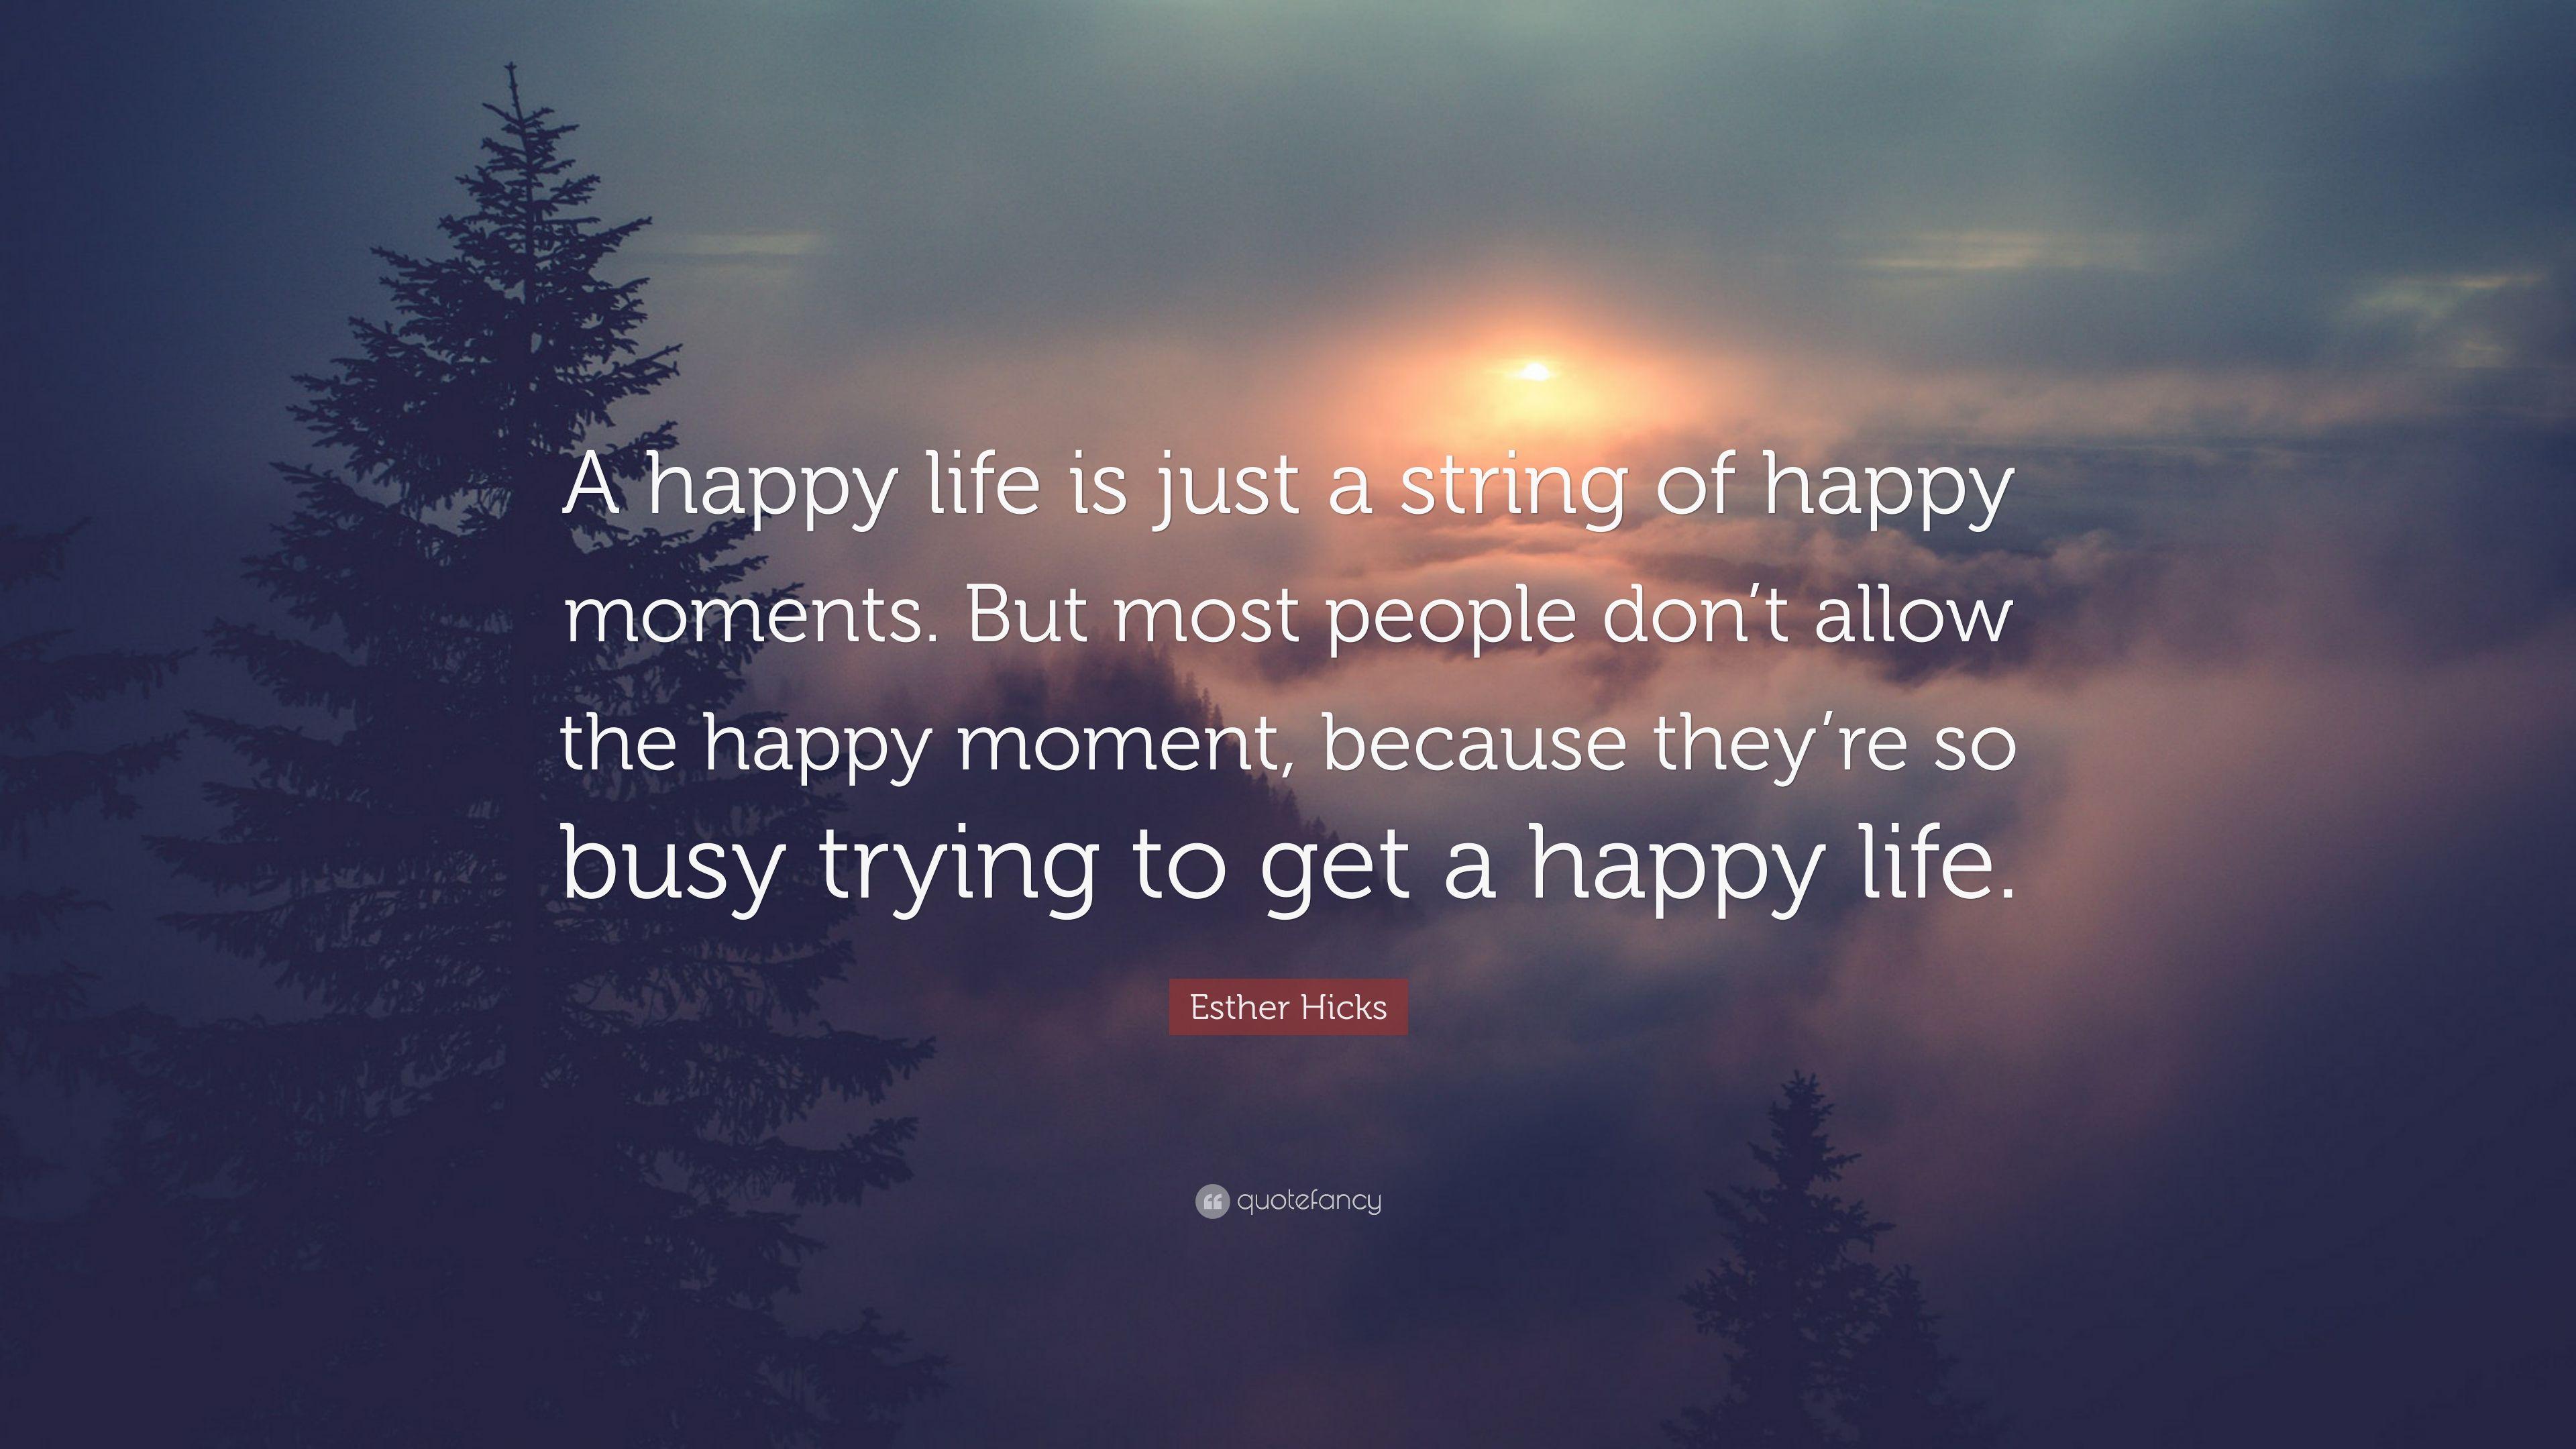 Esther Hicks Quote: “A happy life is just a string of happy moments